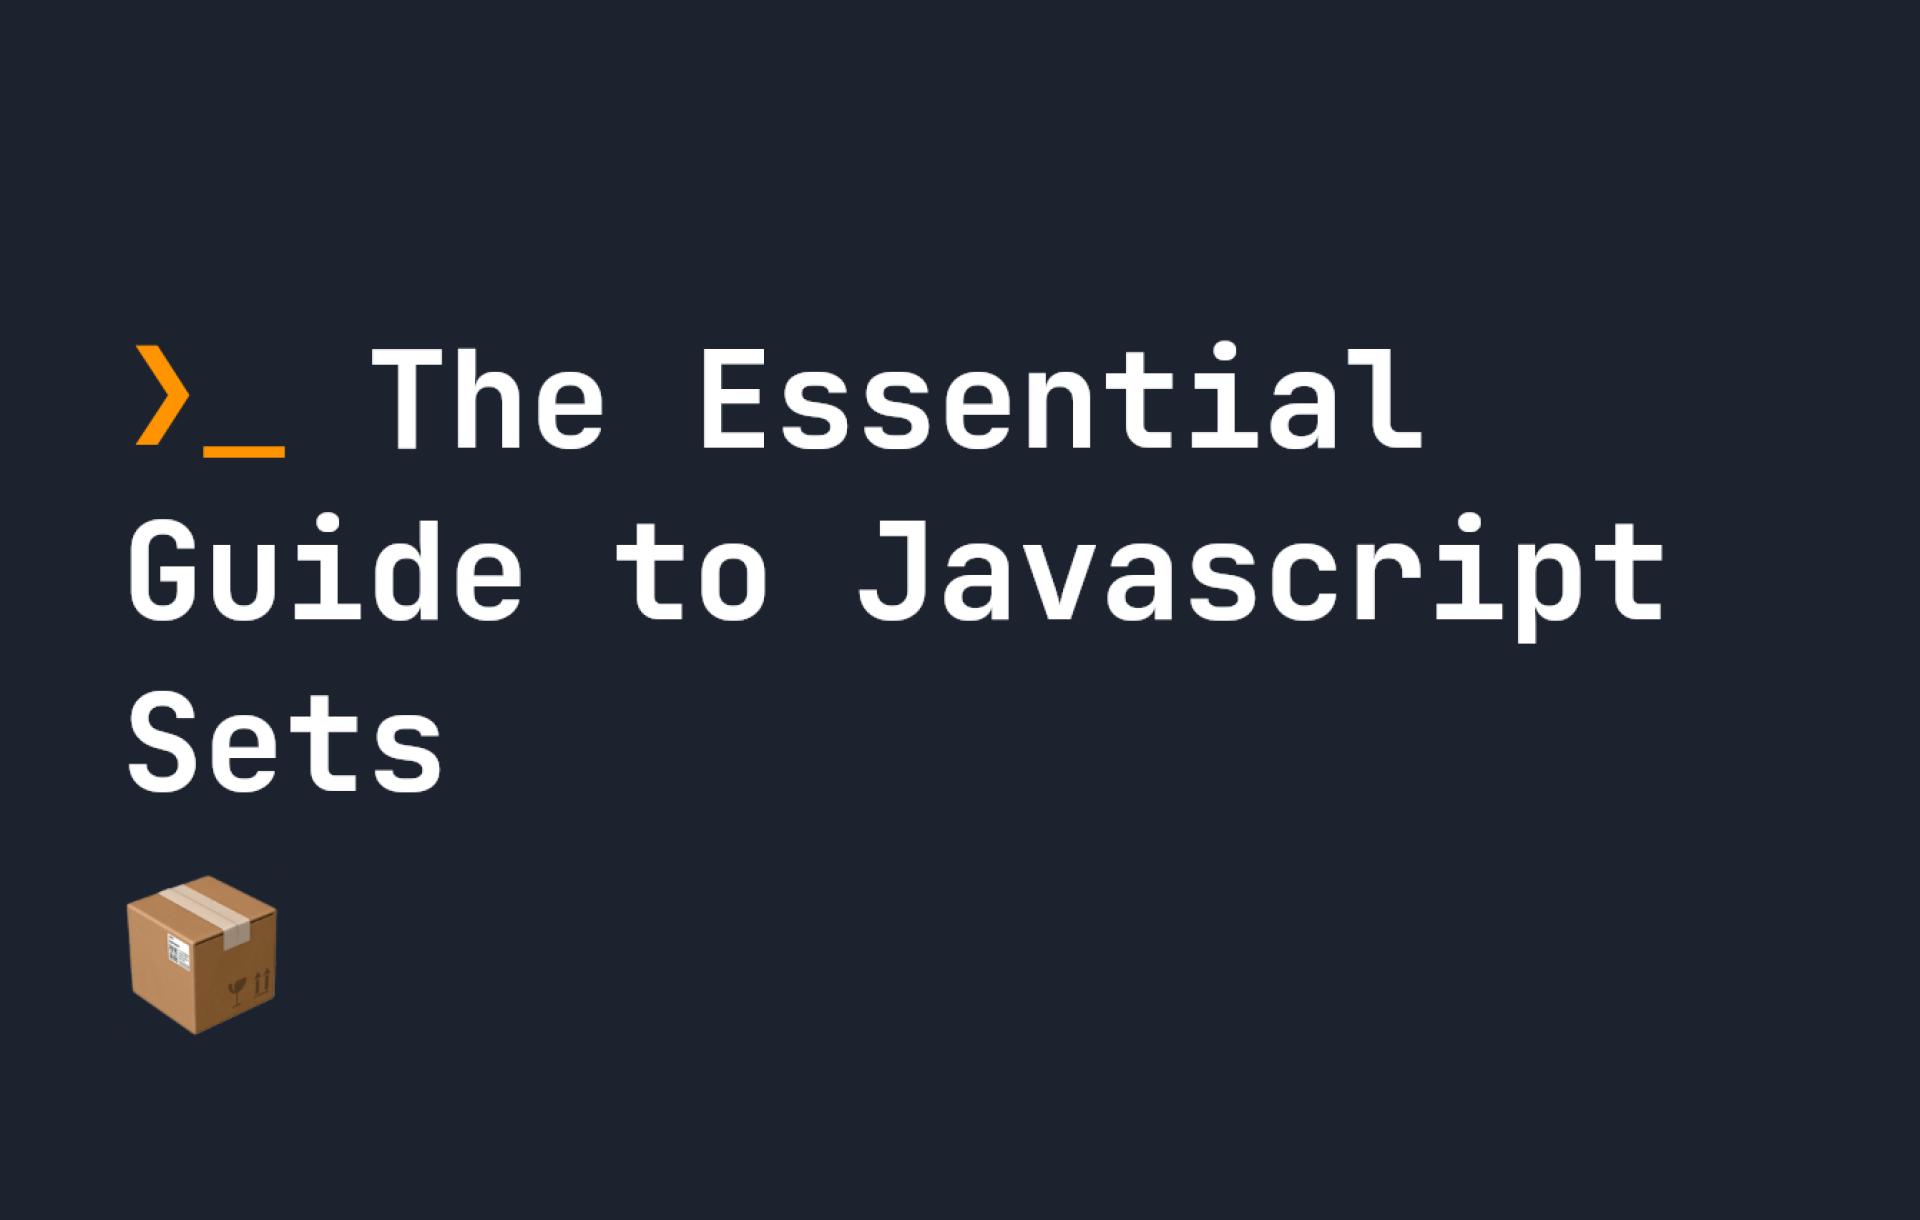 The Essential Guide to Javascript Sets